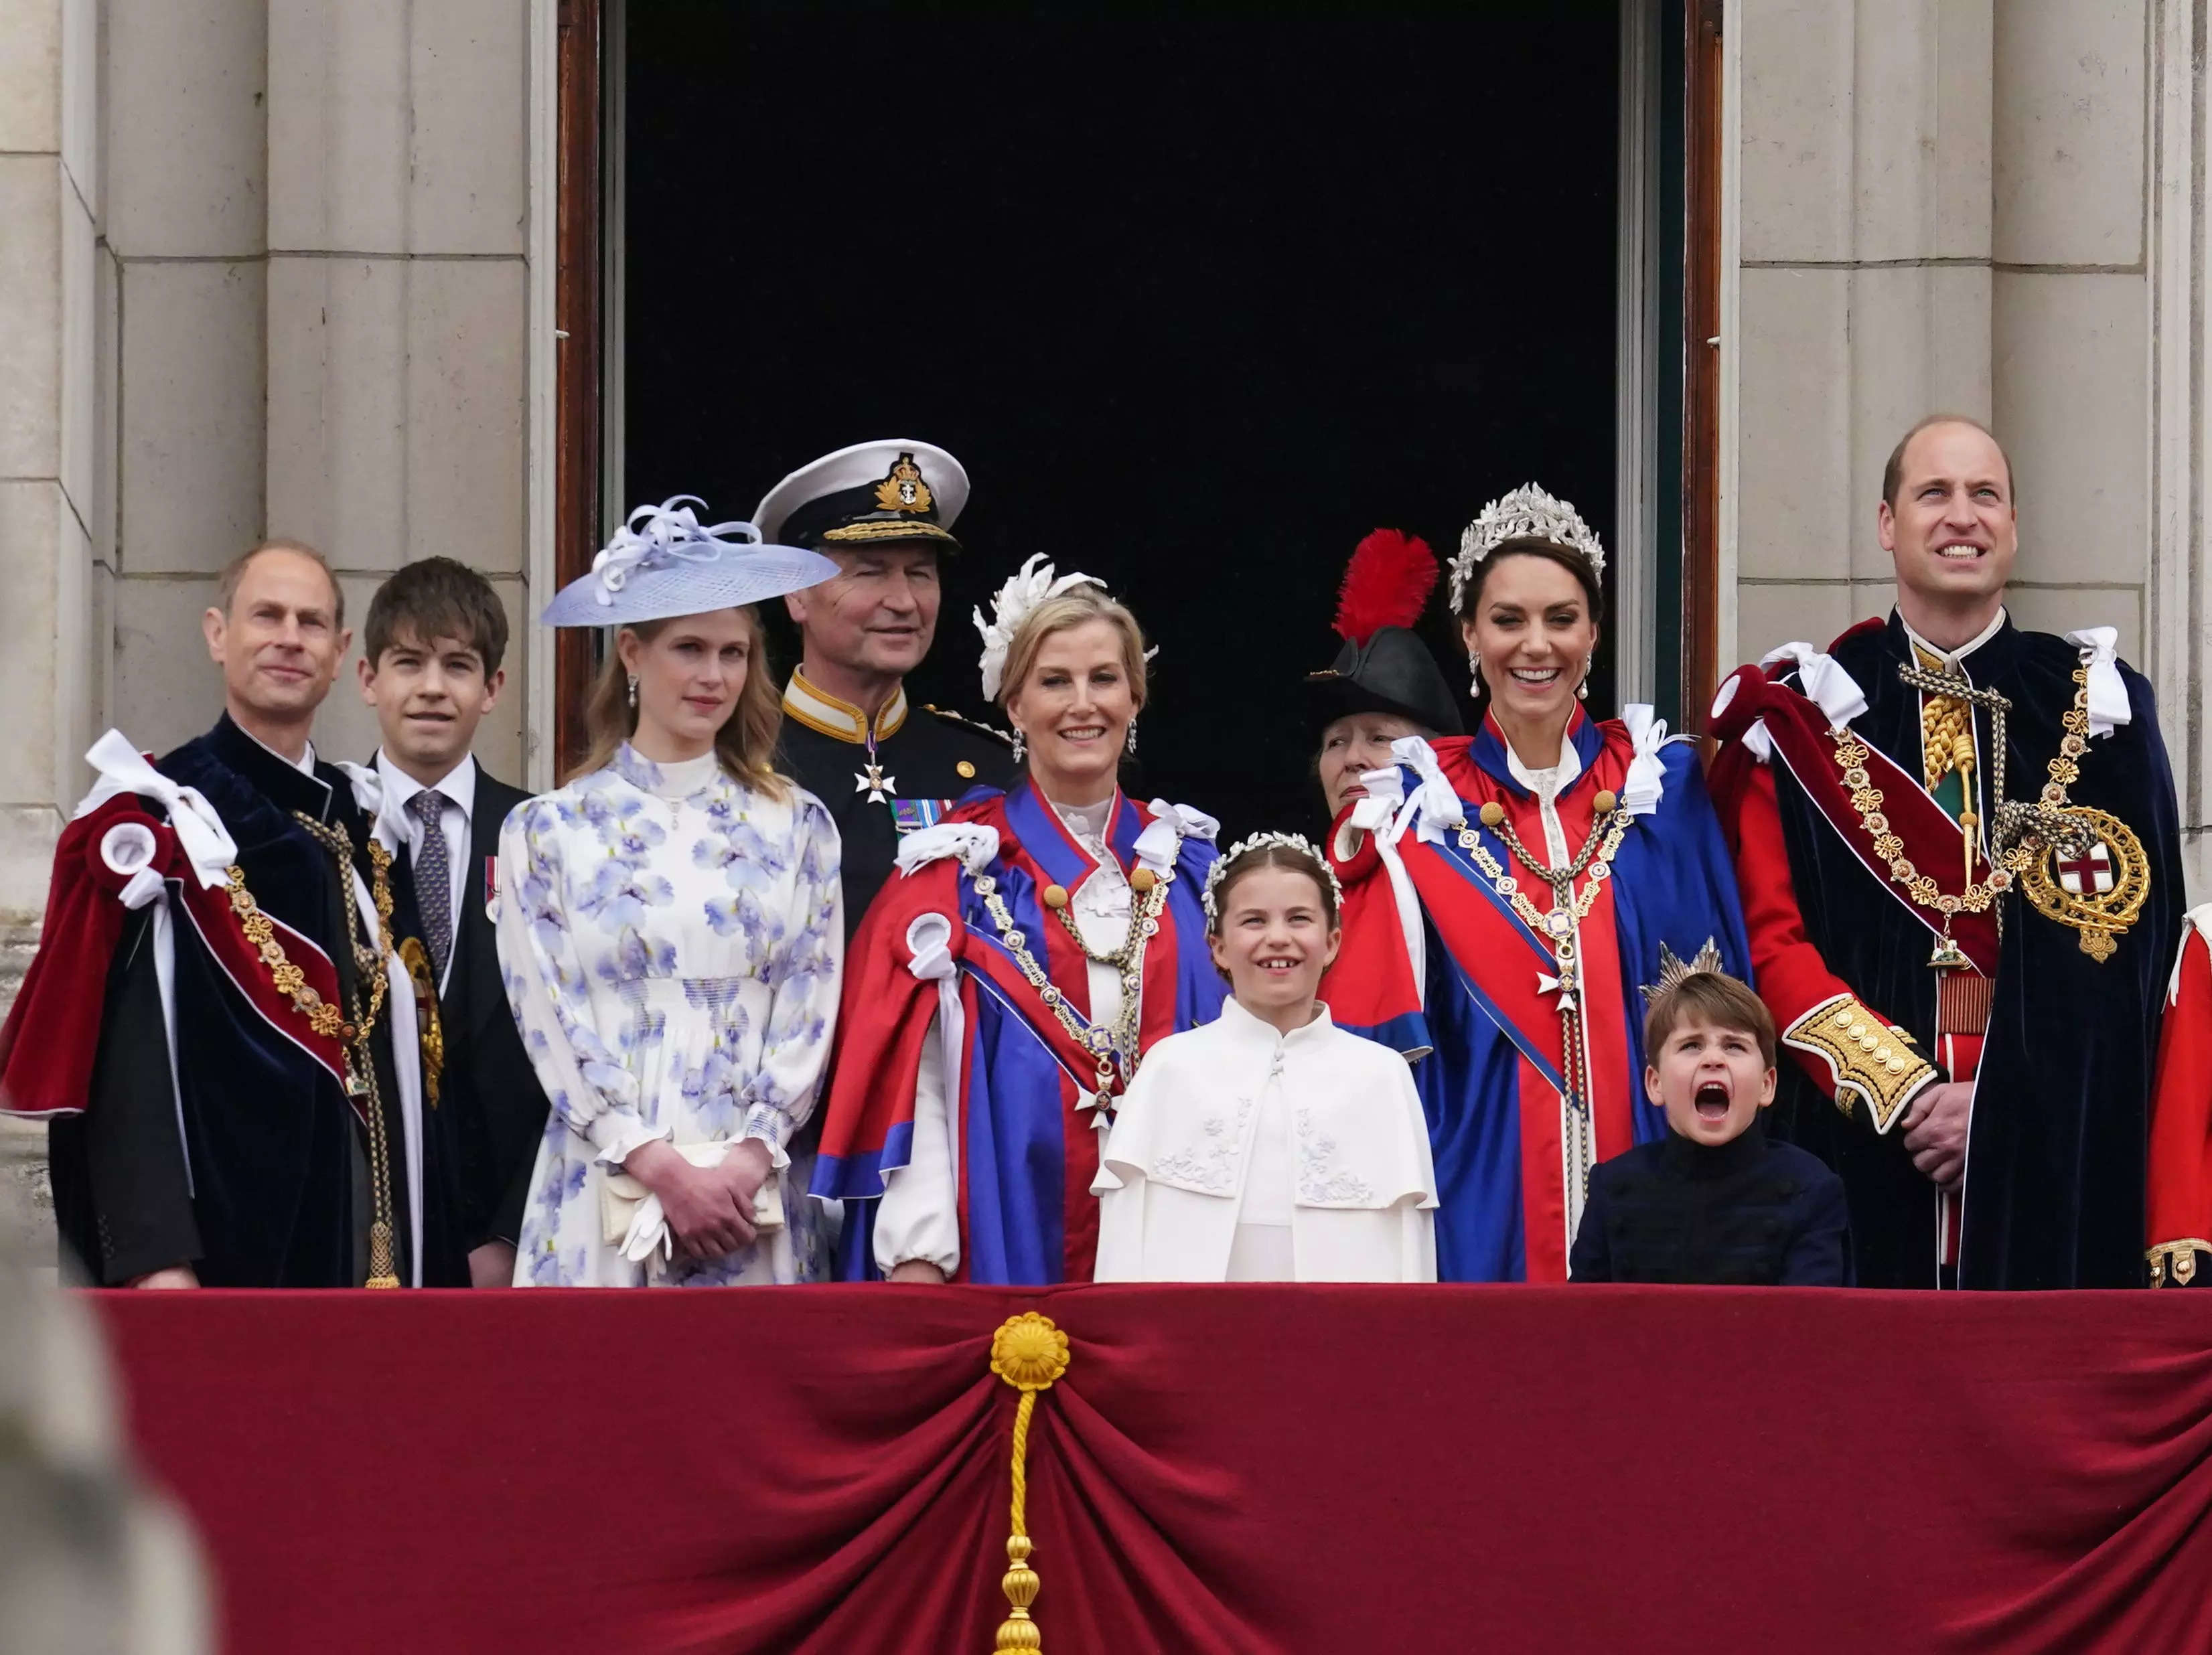 Other members of the royal family on the Buckingham Palace balcony.